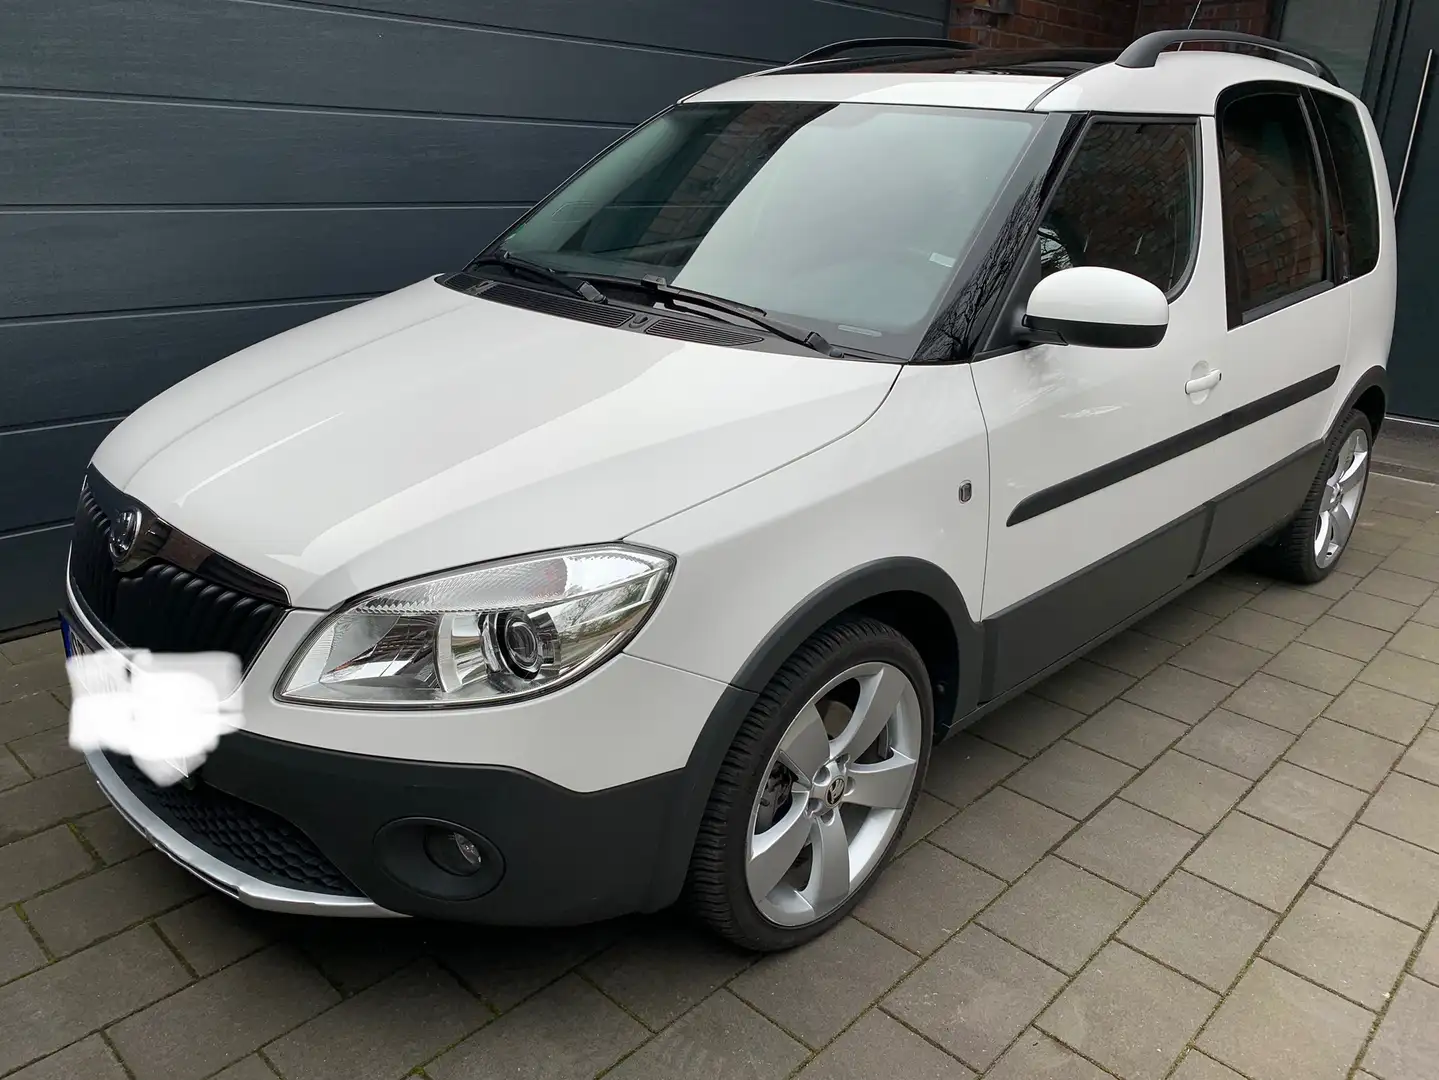 Skoda Roomster Roomster 1.2 TSI DSG Scout - 1